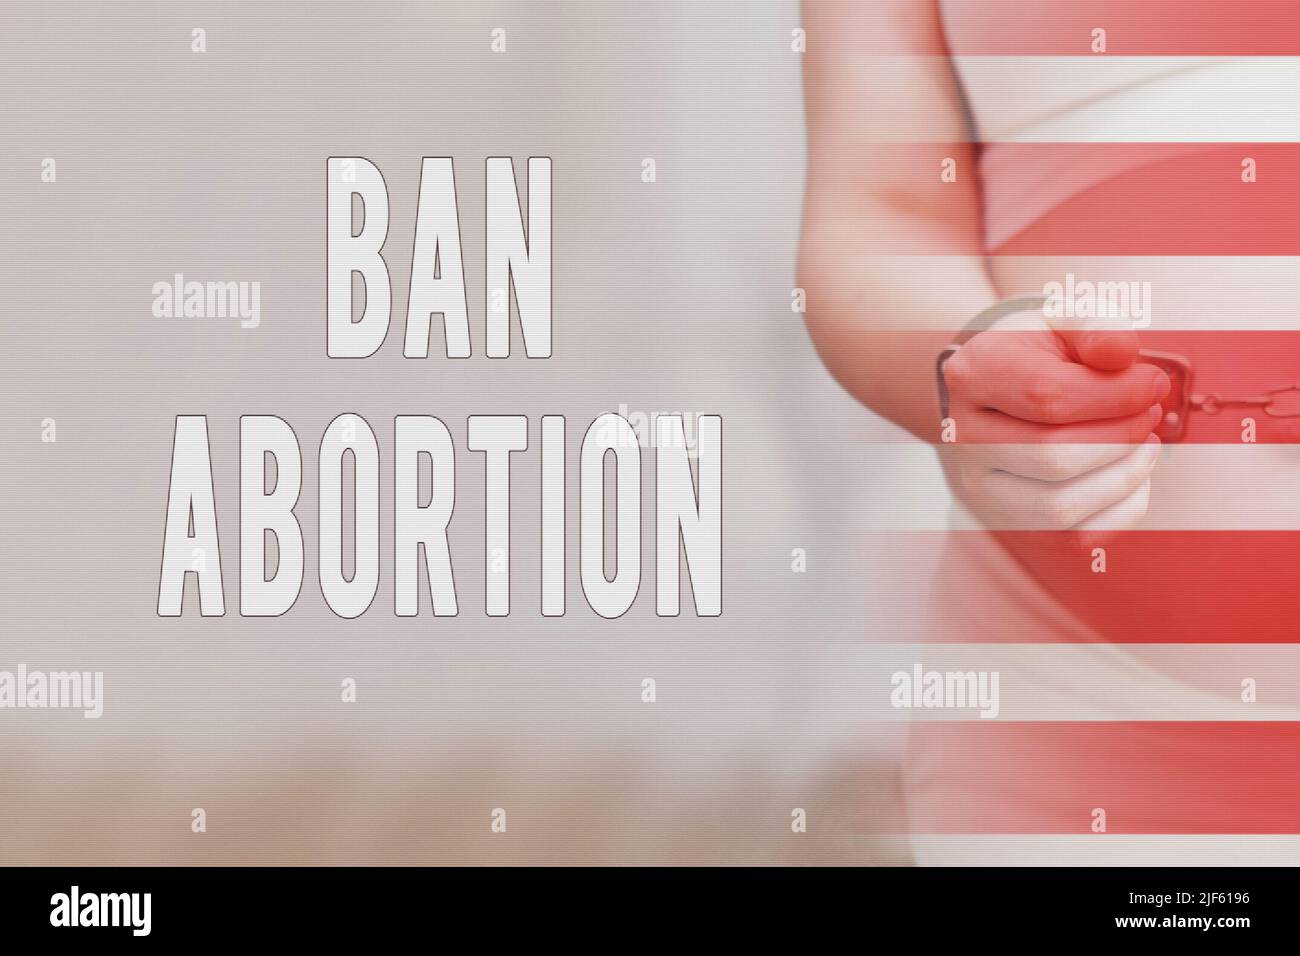 Text about the ban on abortions and chained hands of a pregnant woman, home living room Stock Photo